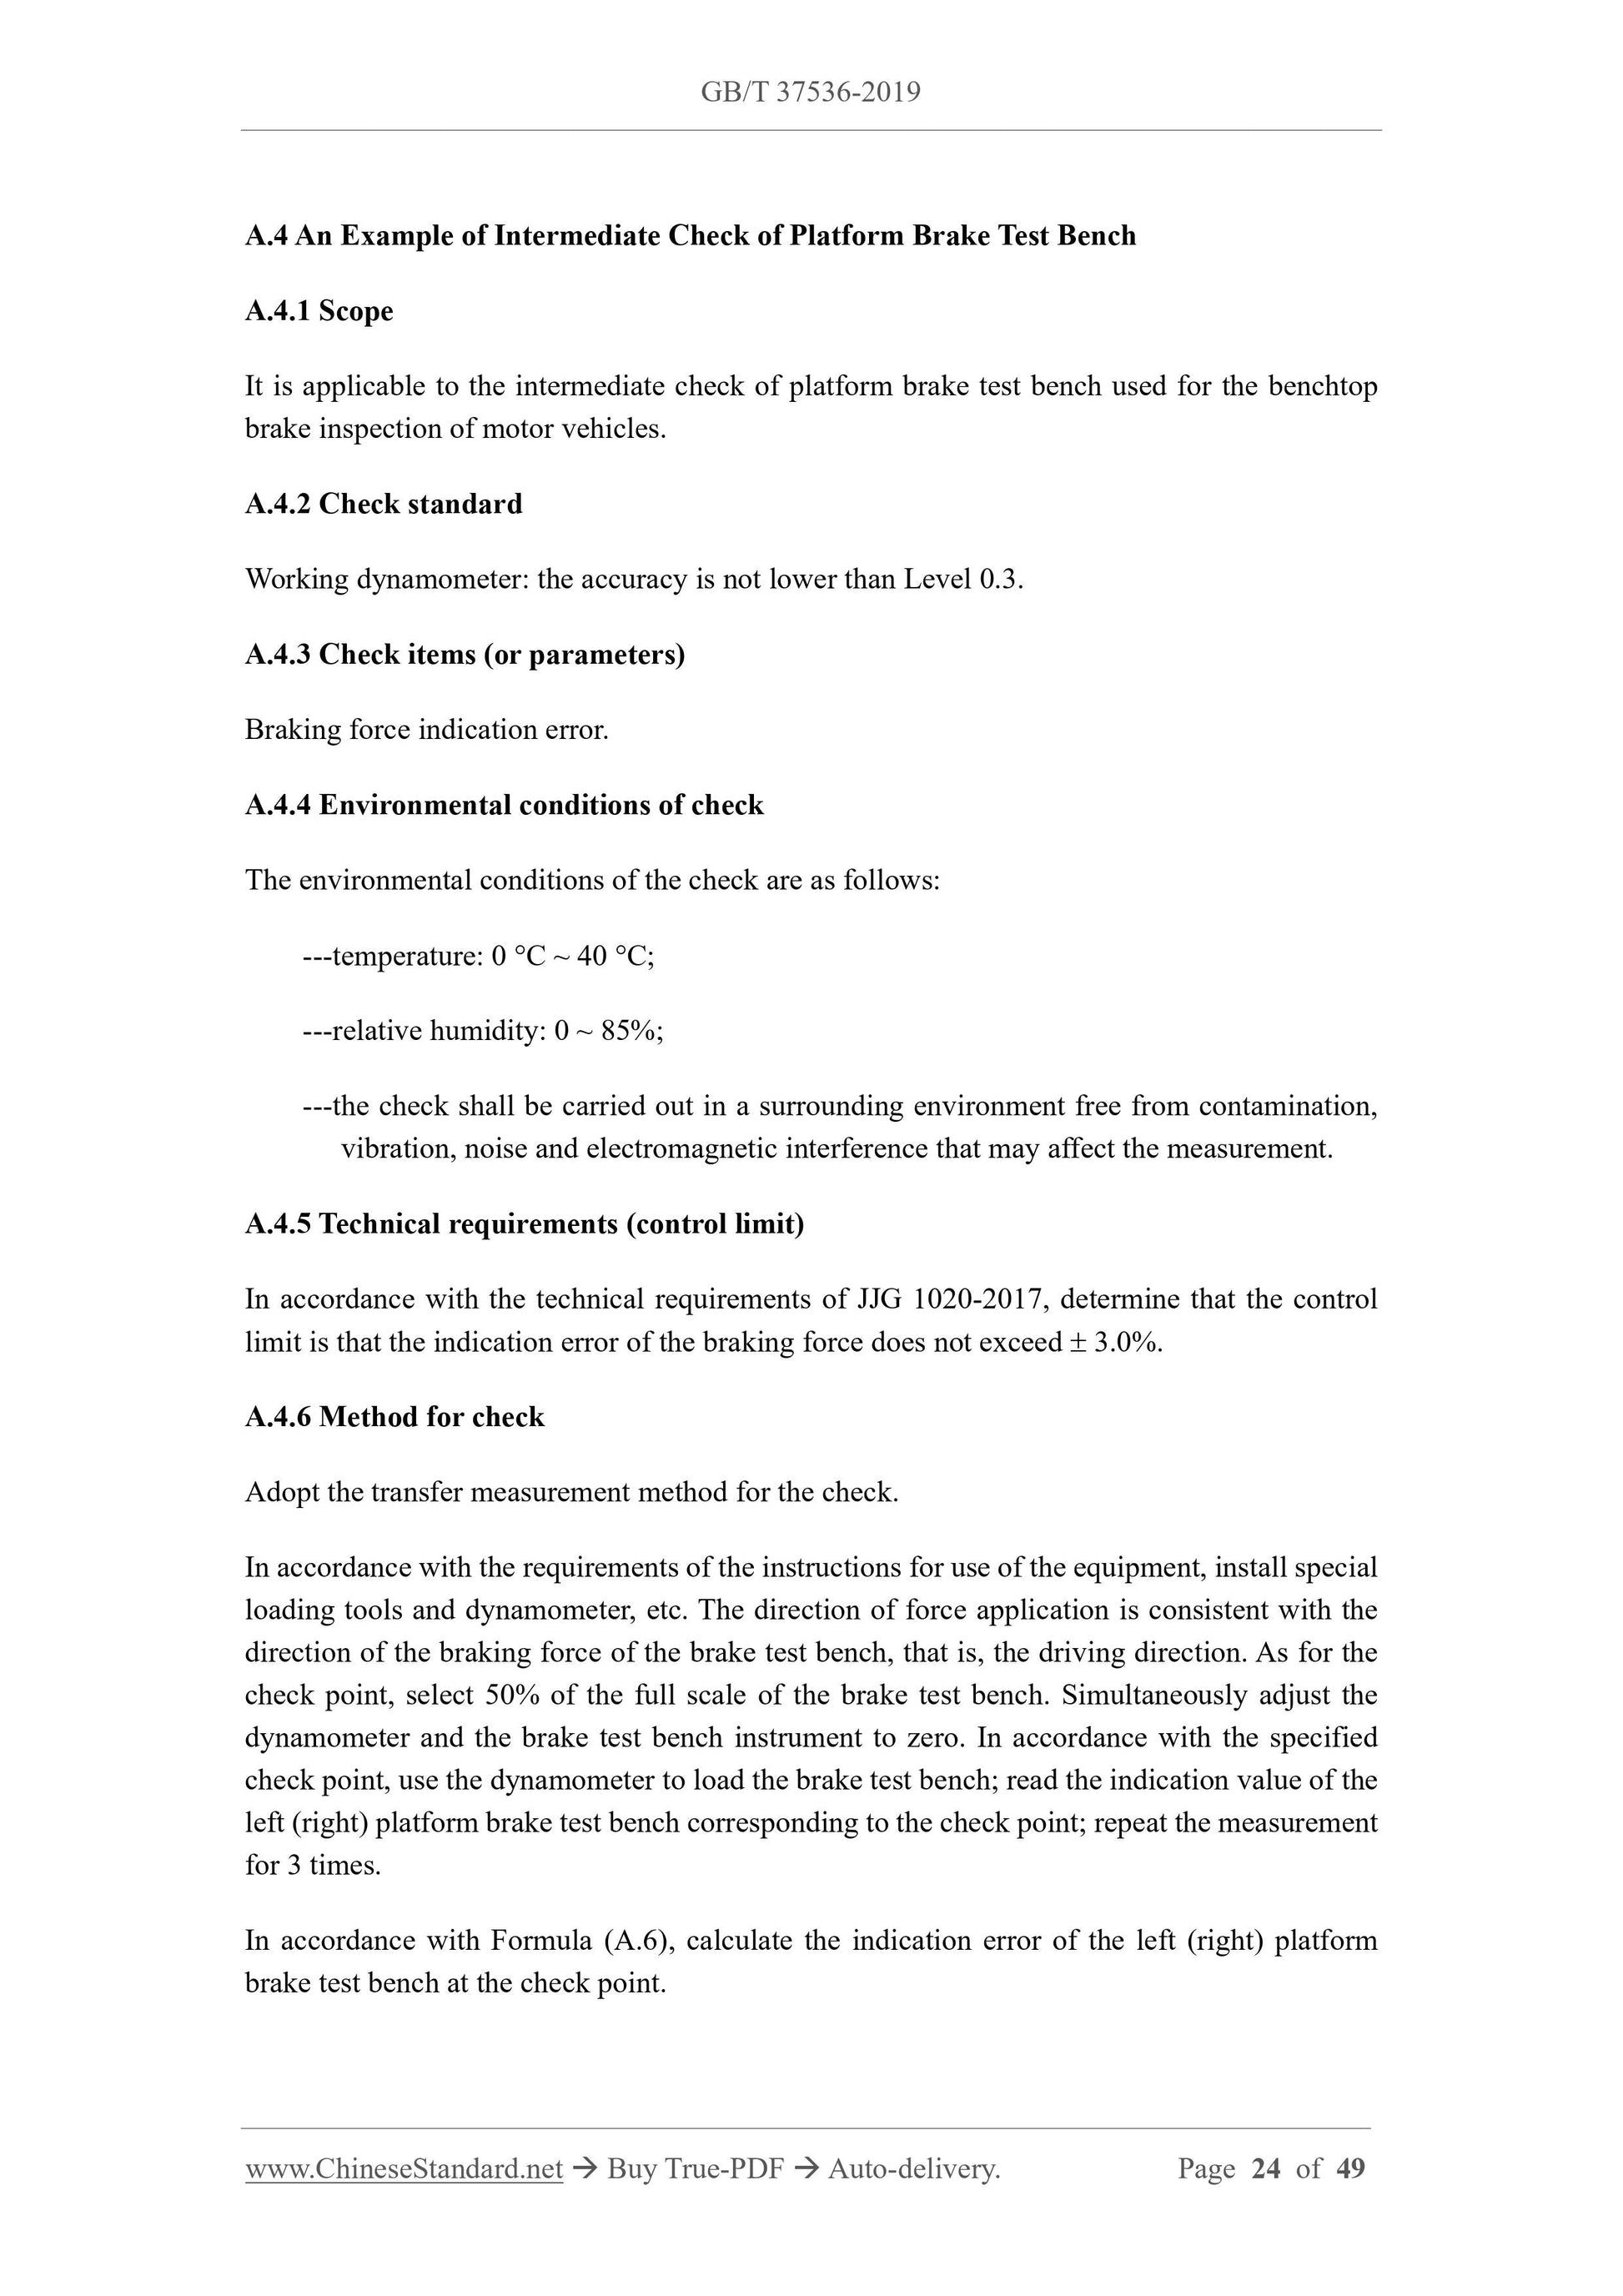 GB/T 37536-2019 Page 9